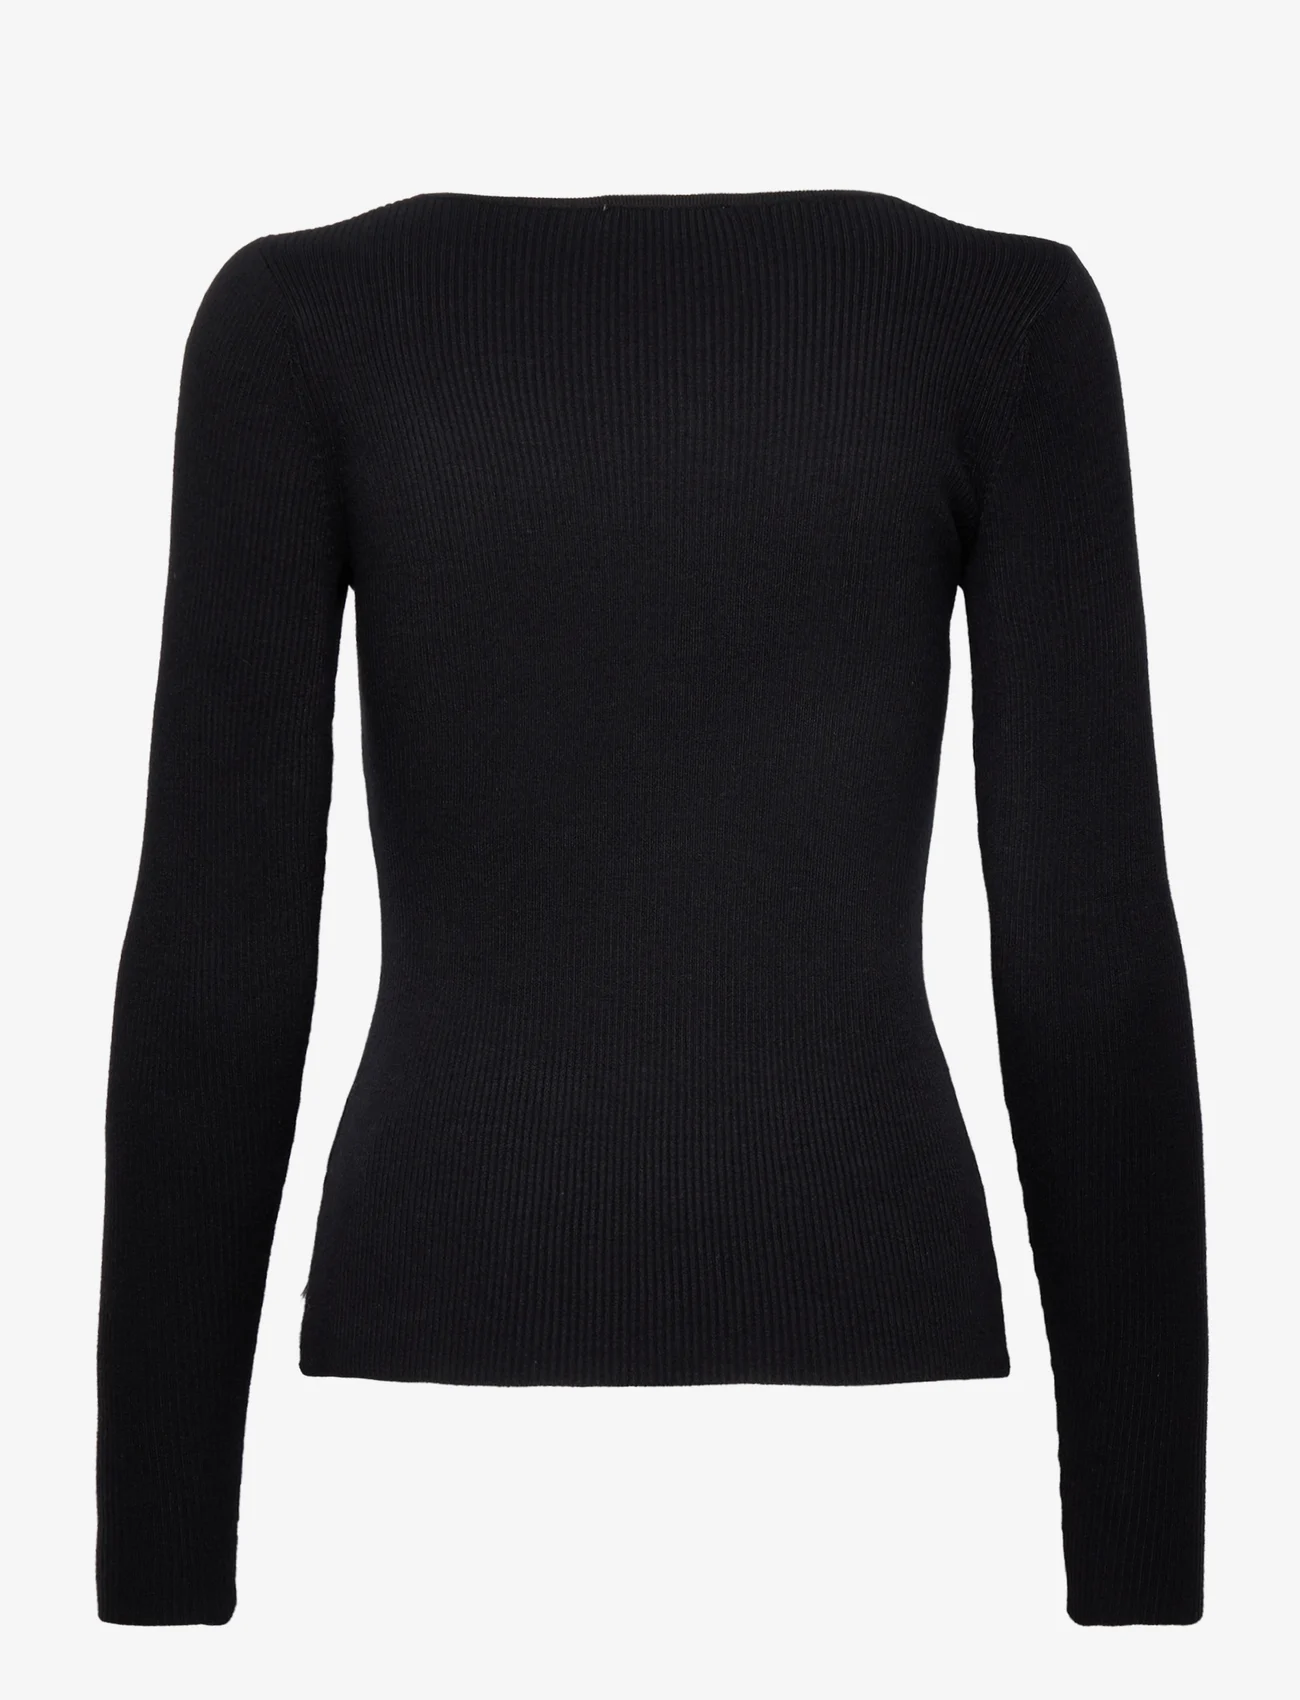 Coster Copenhagen - Knit with long sleeves and squared - jumpers - black - 1